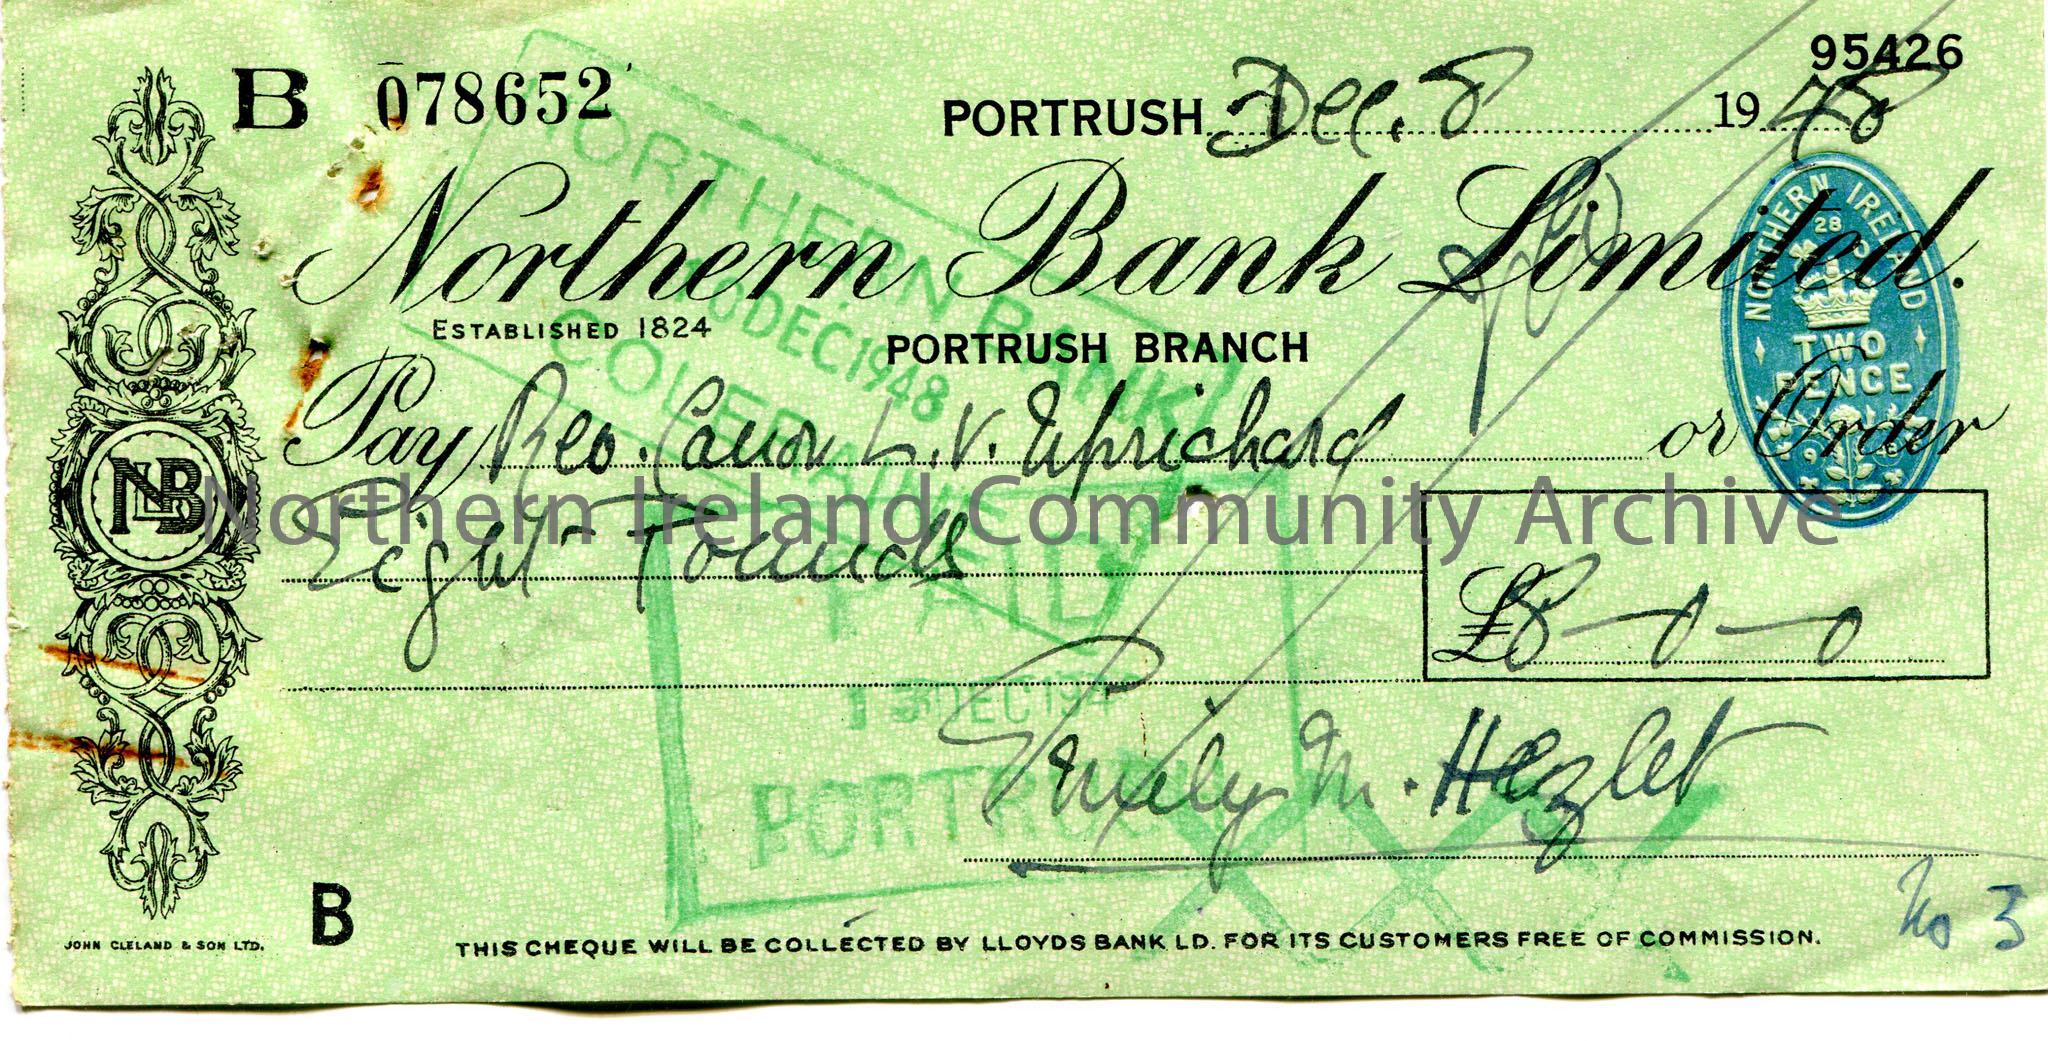 Northern Bank Limited, Portrush branch, cheque. Dated 8th December, 1948. Payable to Rev Canon L. V. Uprichard from Emily Hezlet for £8.0.0. Scor…